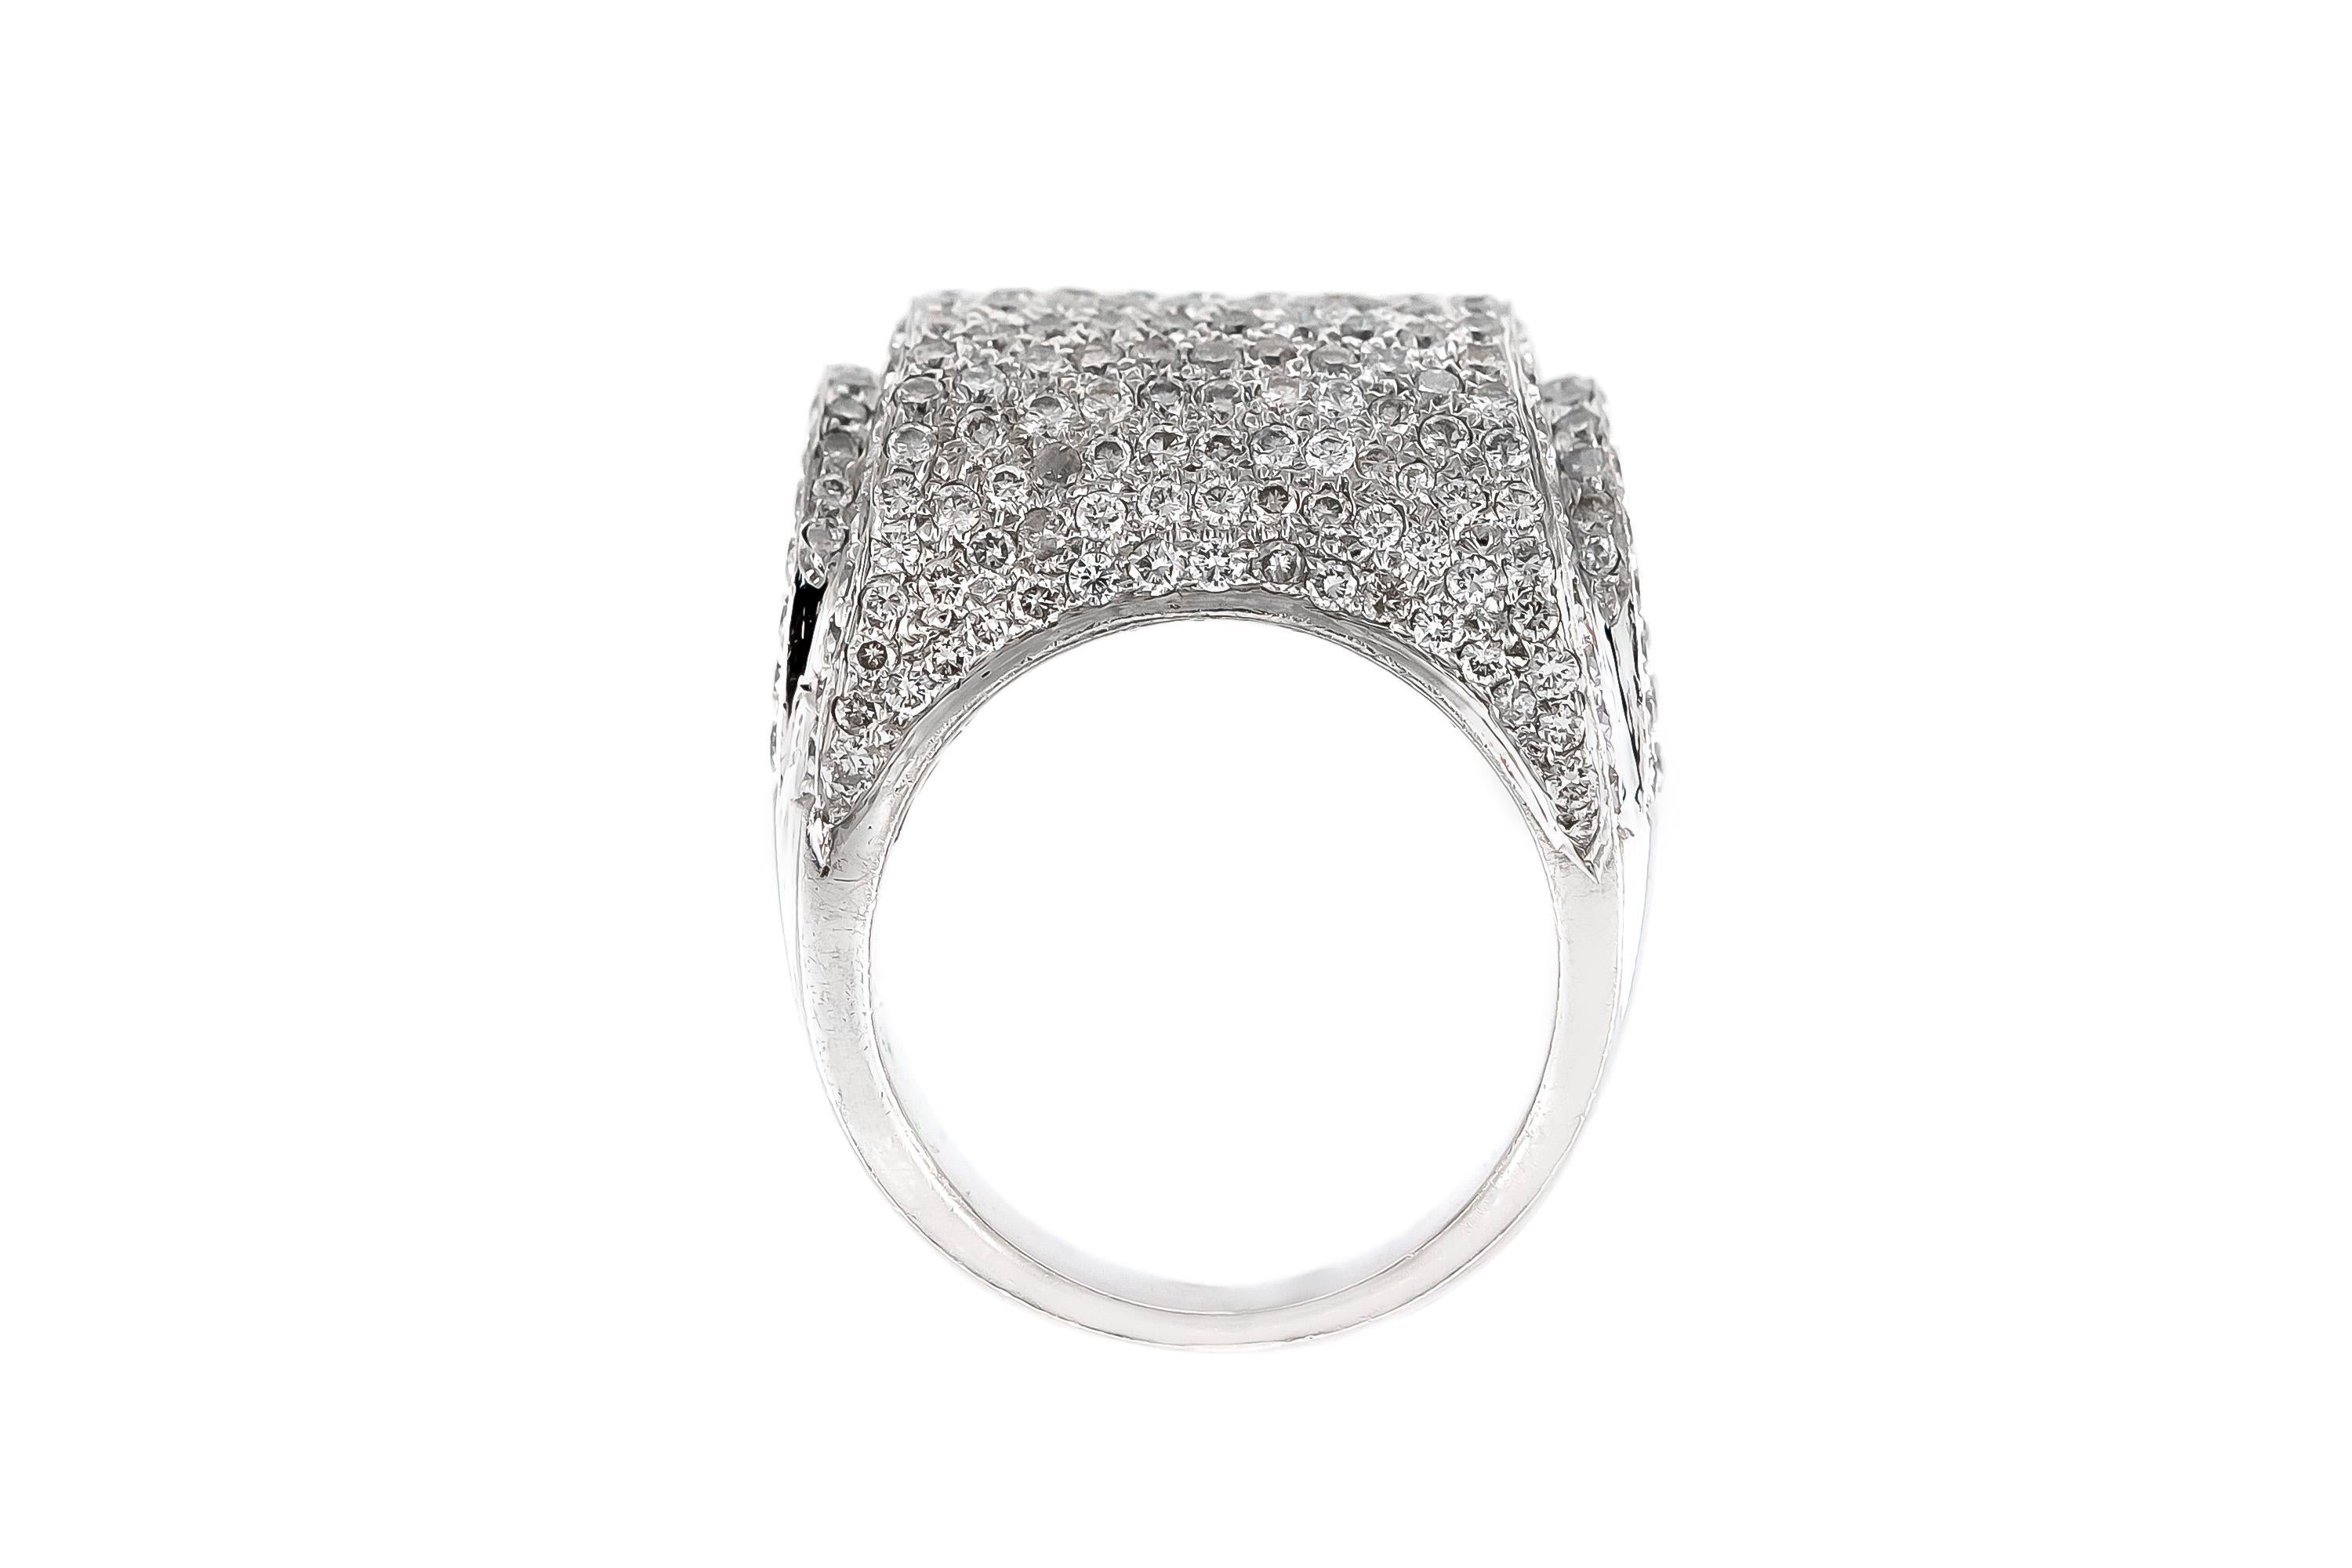 The ring is finely crafted in 18k white gold with diamonds weighing approximately totsl of 3.00 carat.
Circa 2000.